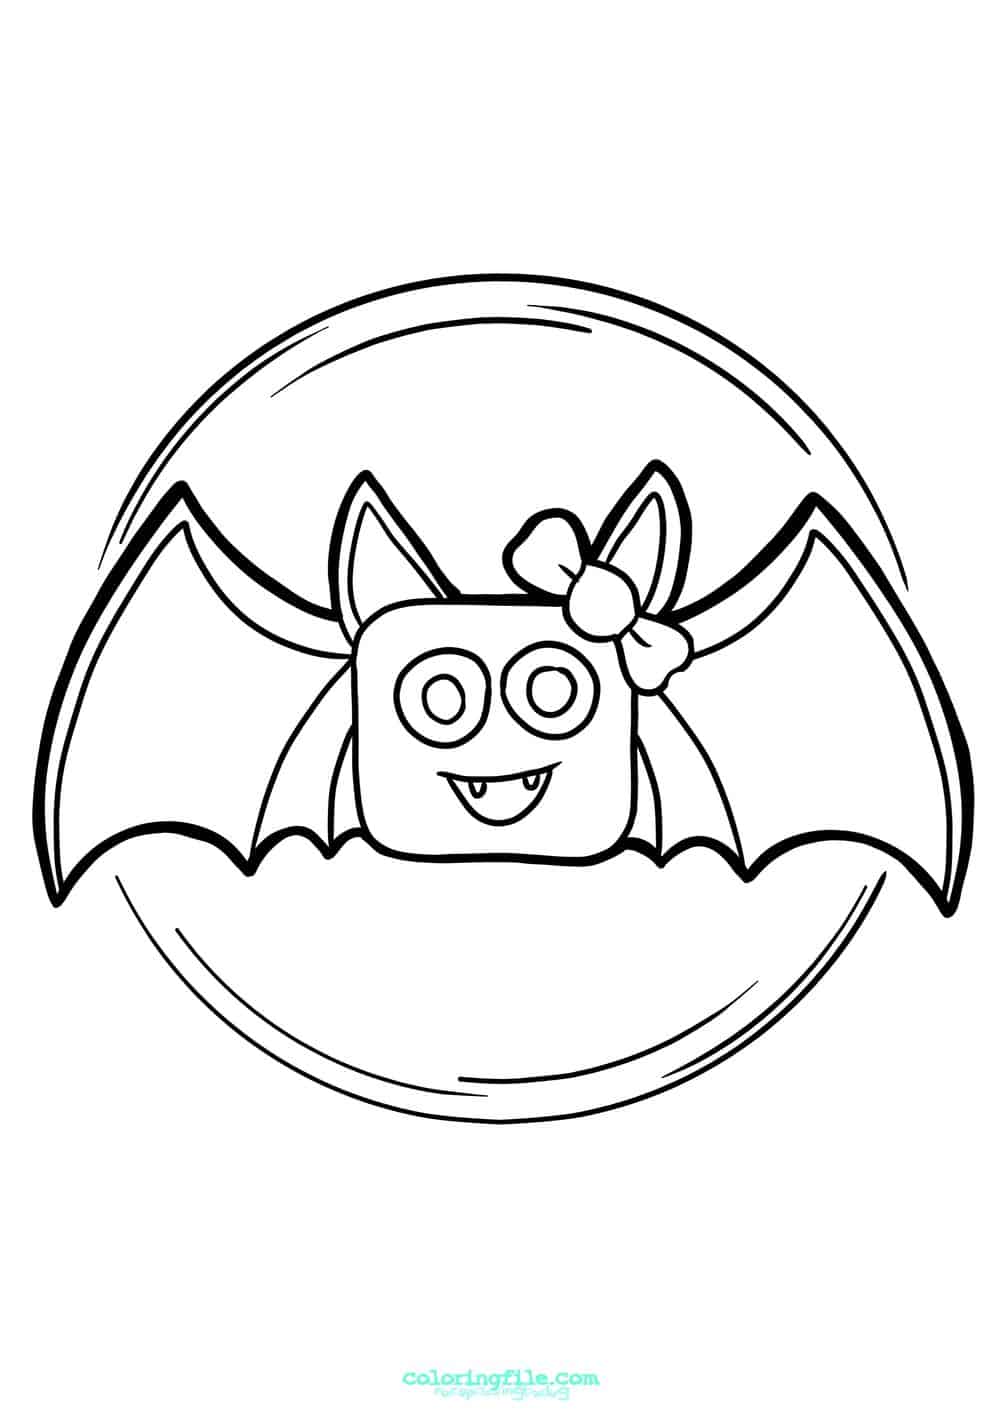 Halloween bat and moon coloring pages